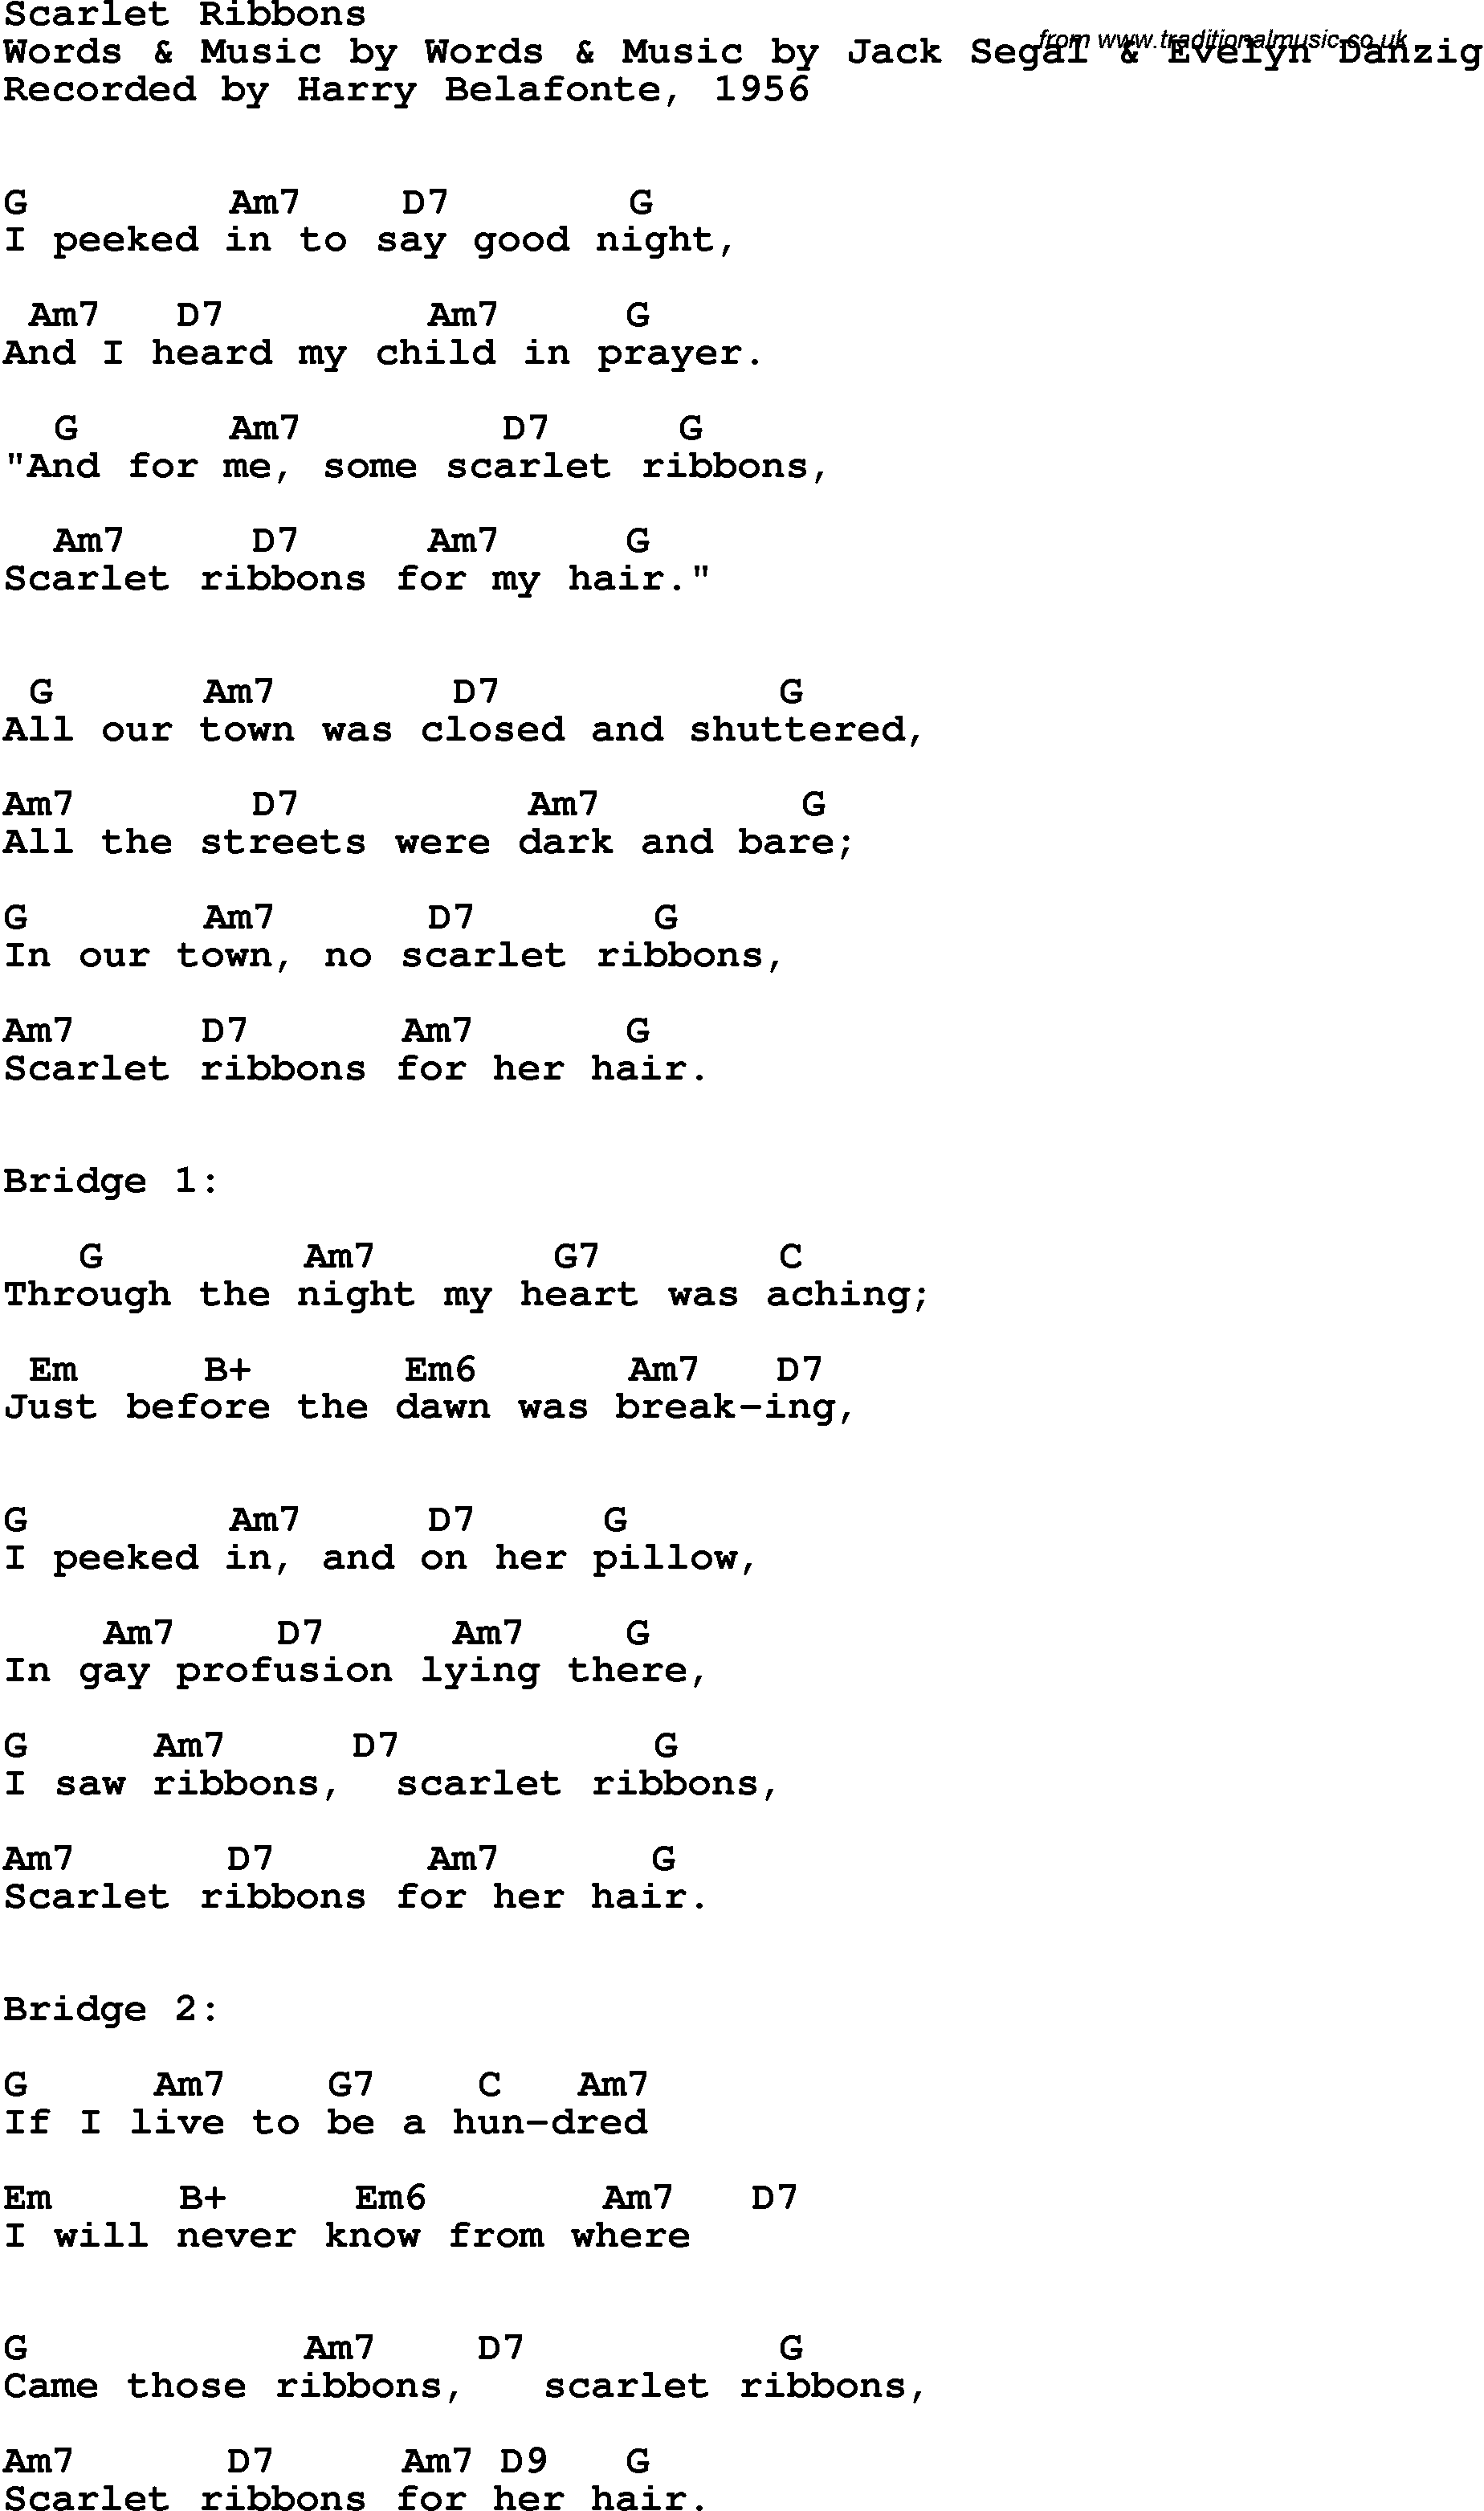 Song Lyrics with guitar chords for Scarlet Ribbons - Harry Belafonte, 1956